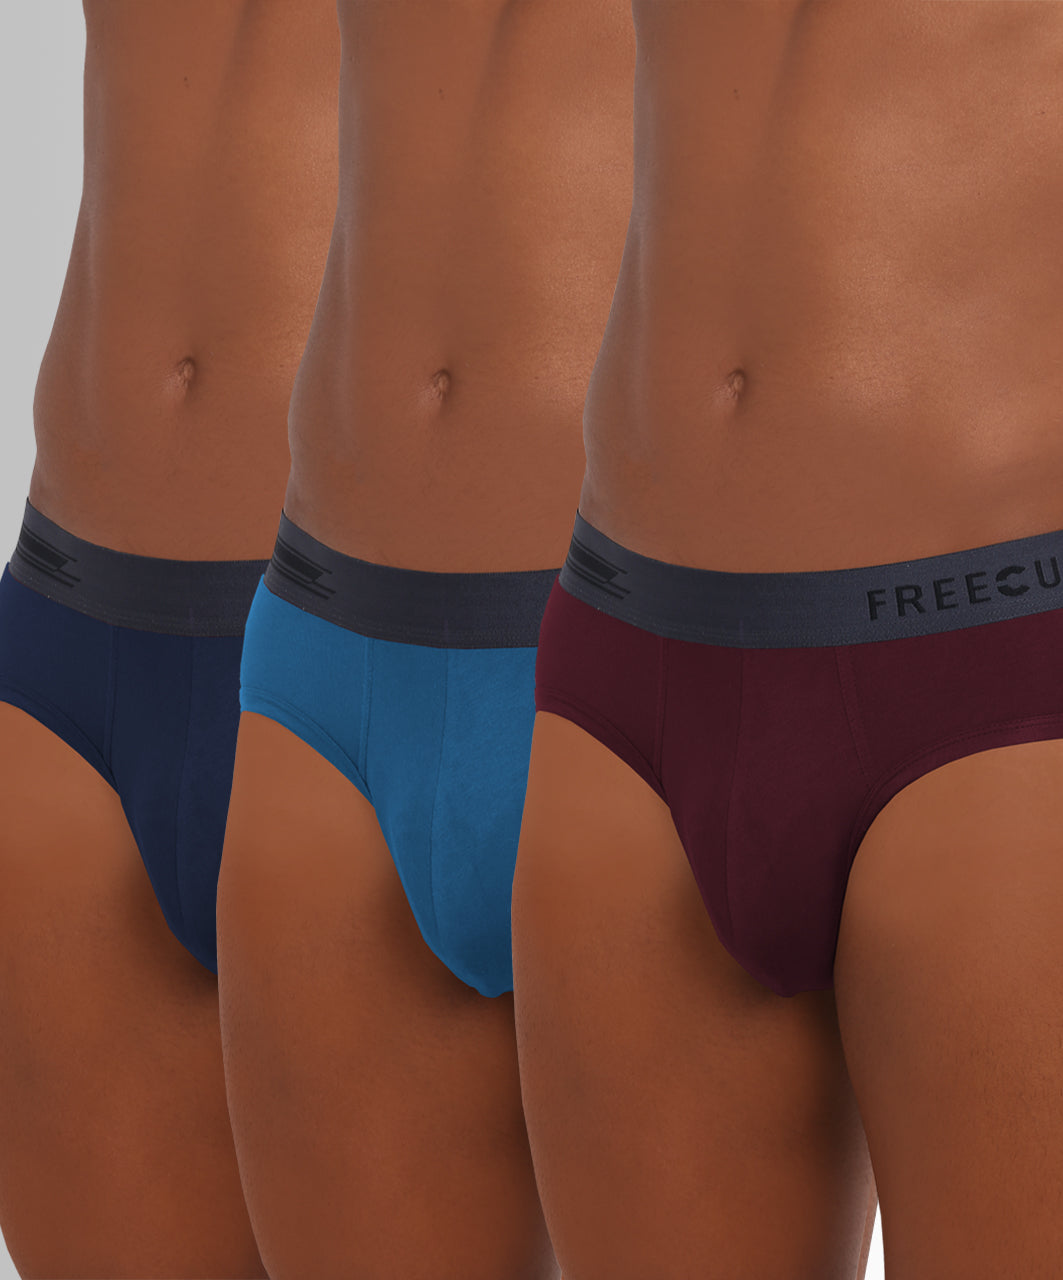 Men's Micro Modal & Elastane Brief in Contrast Waistband (Pack of 3) - freecultr.com